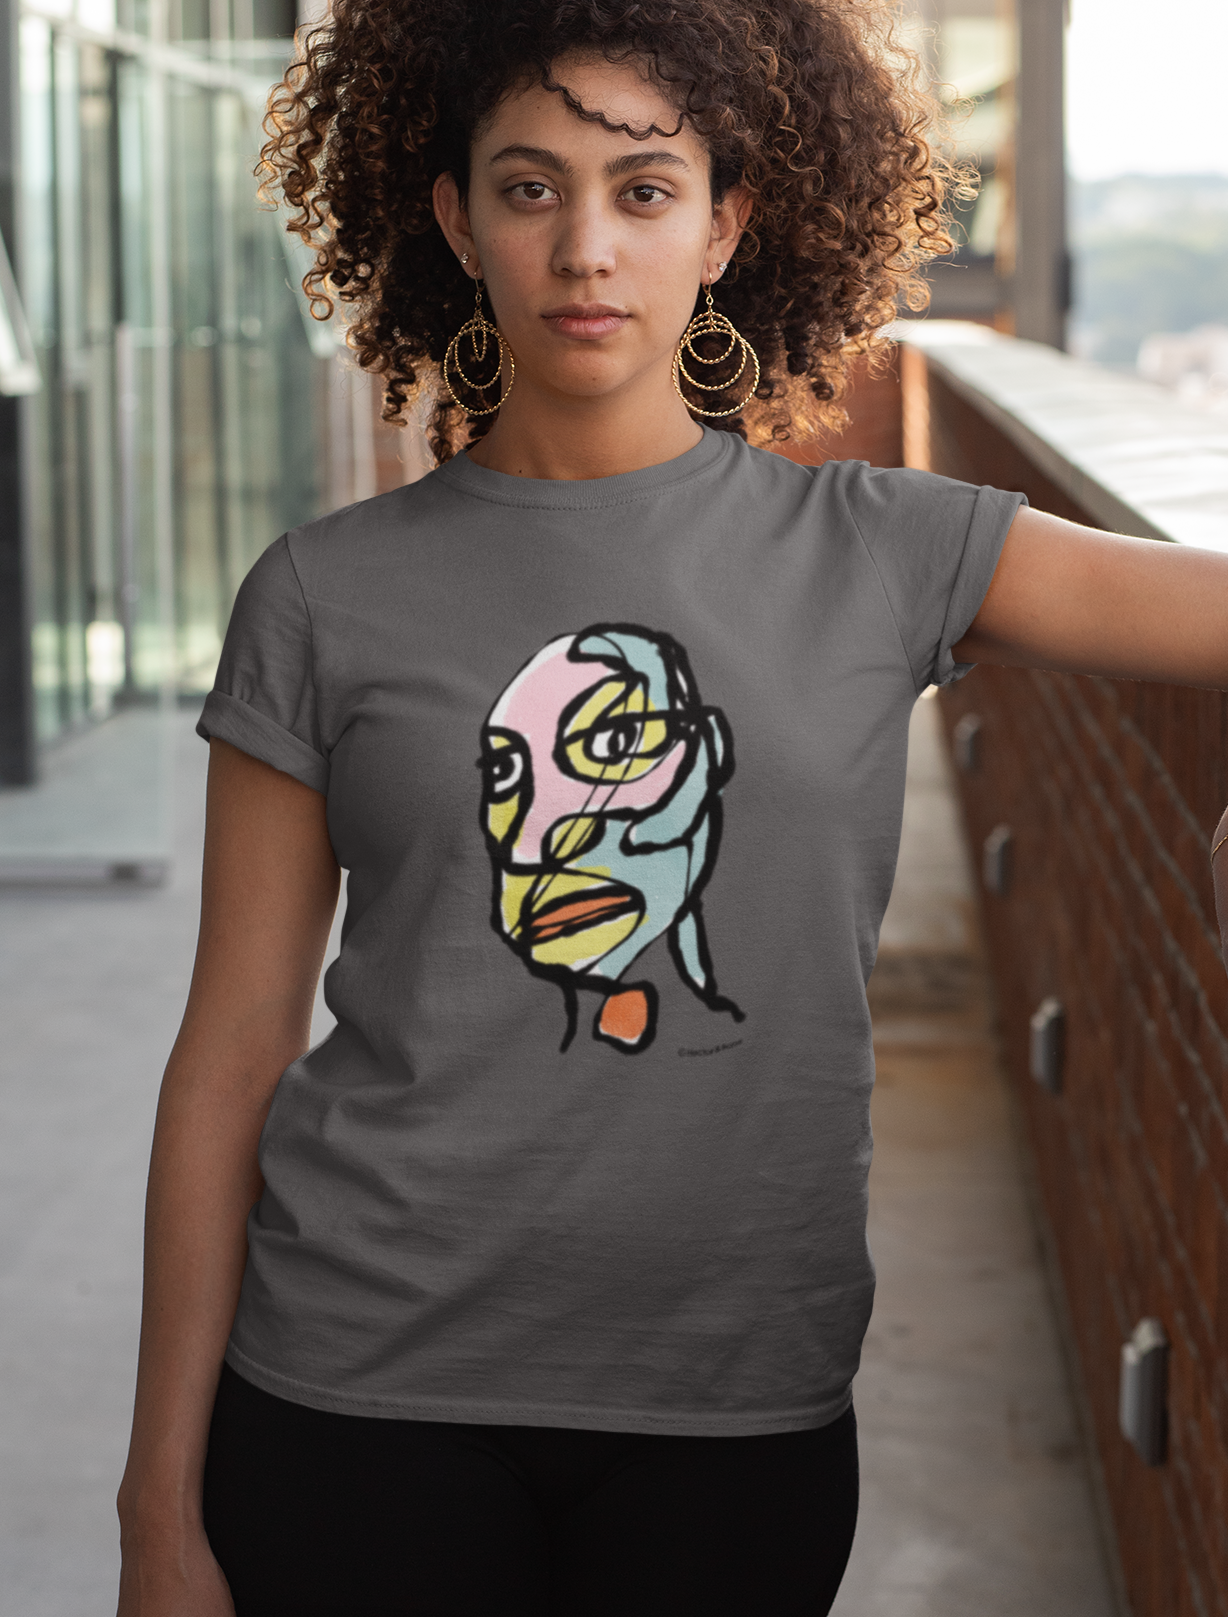 Abstract man portrait t-shirt - Young man wearing an Edgy Eddie abstract man's face illustrated on a vegan dark grey cotton t-shirt by Hector and Bone